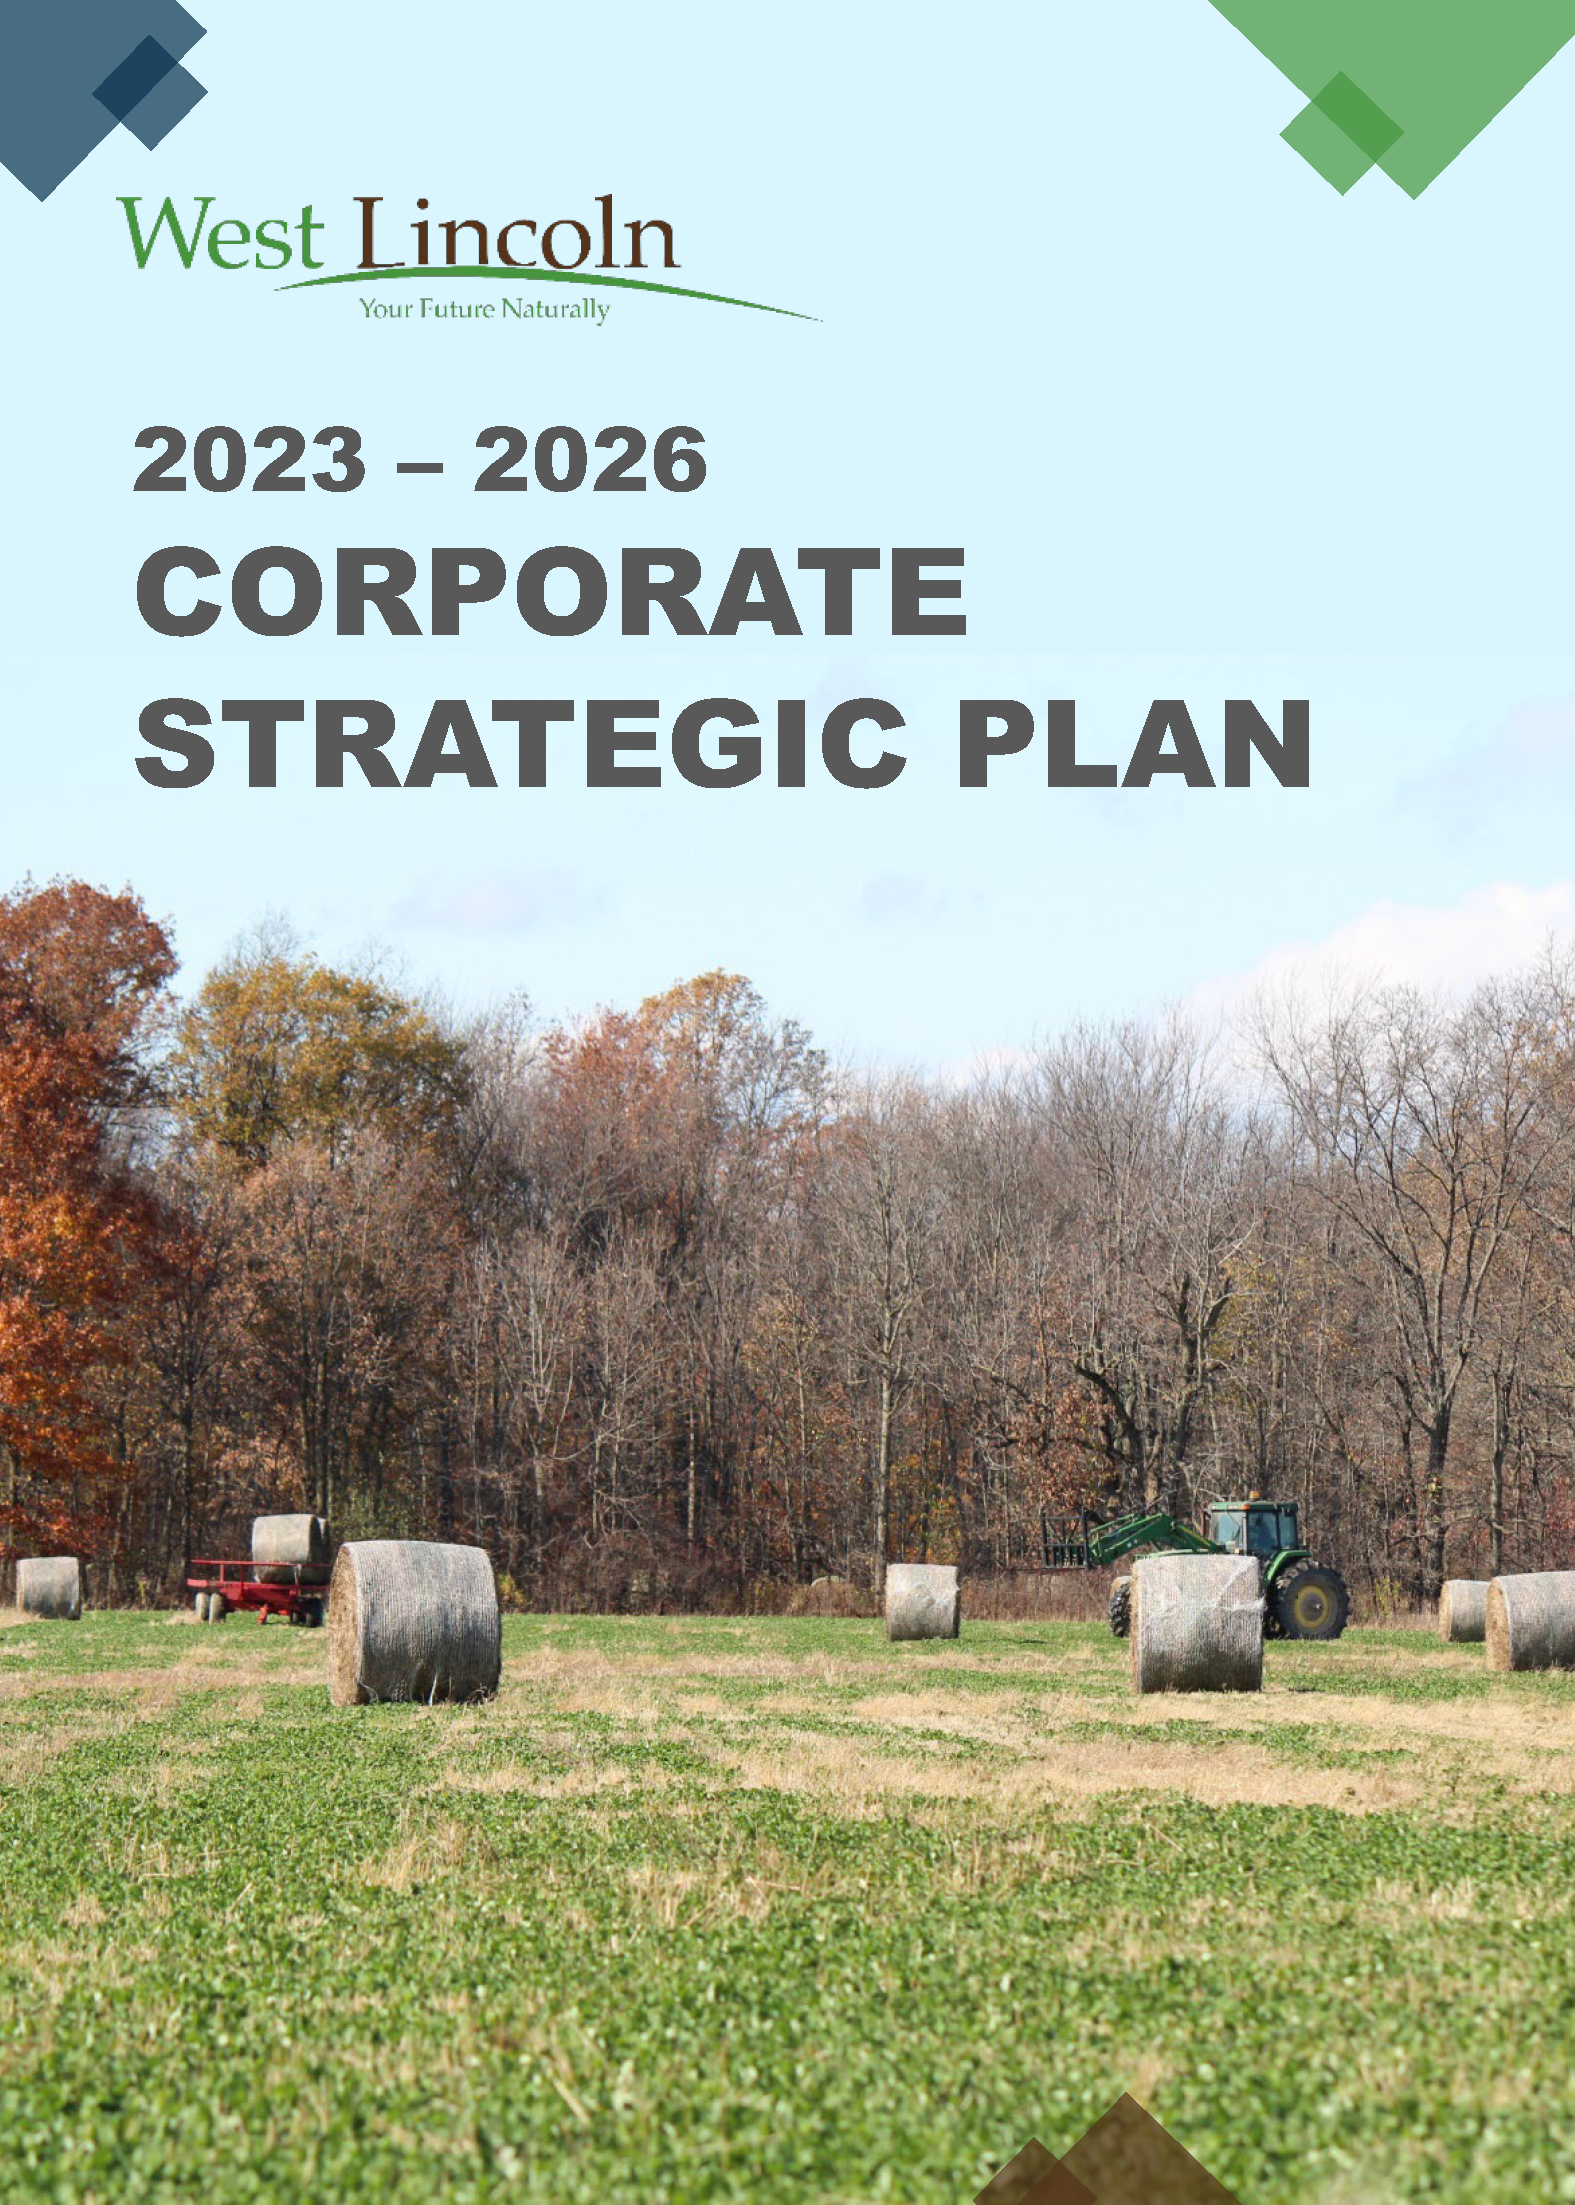 West Lincoln 2023-2026 Corporate Strategic Plan